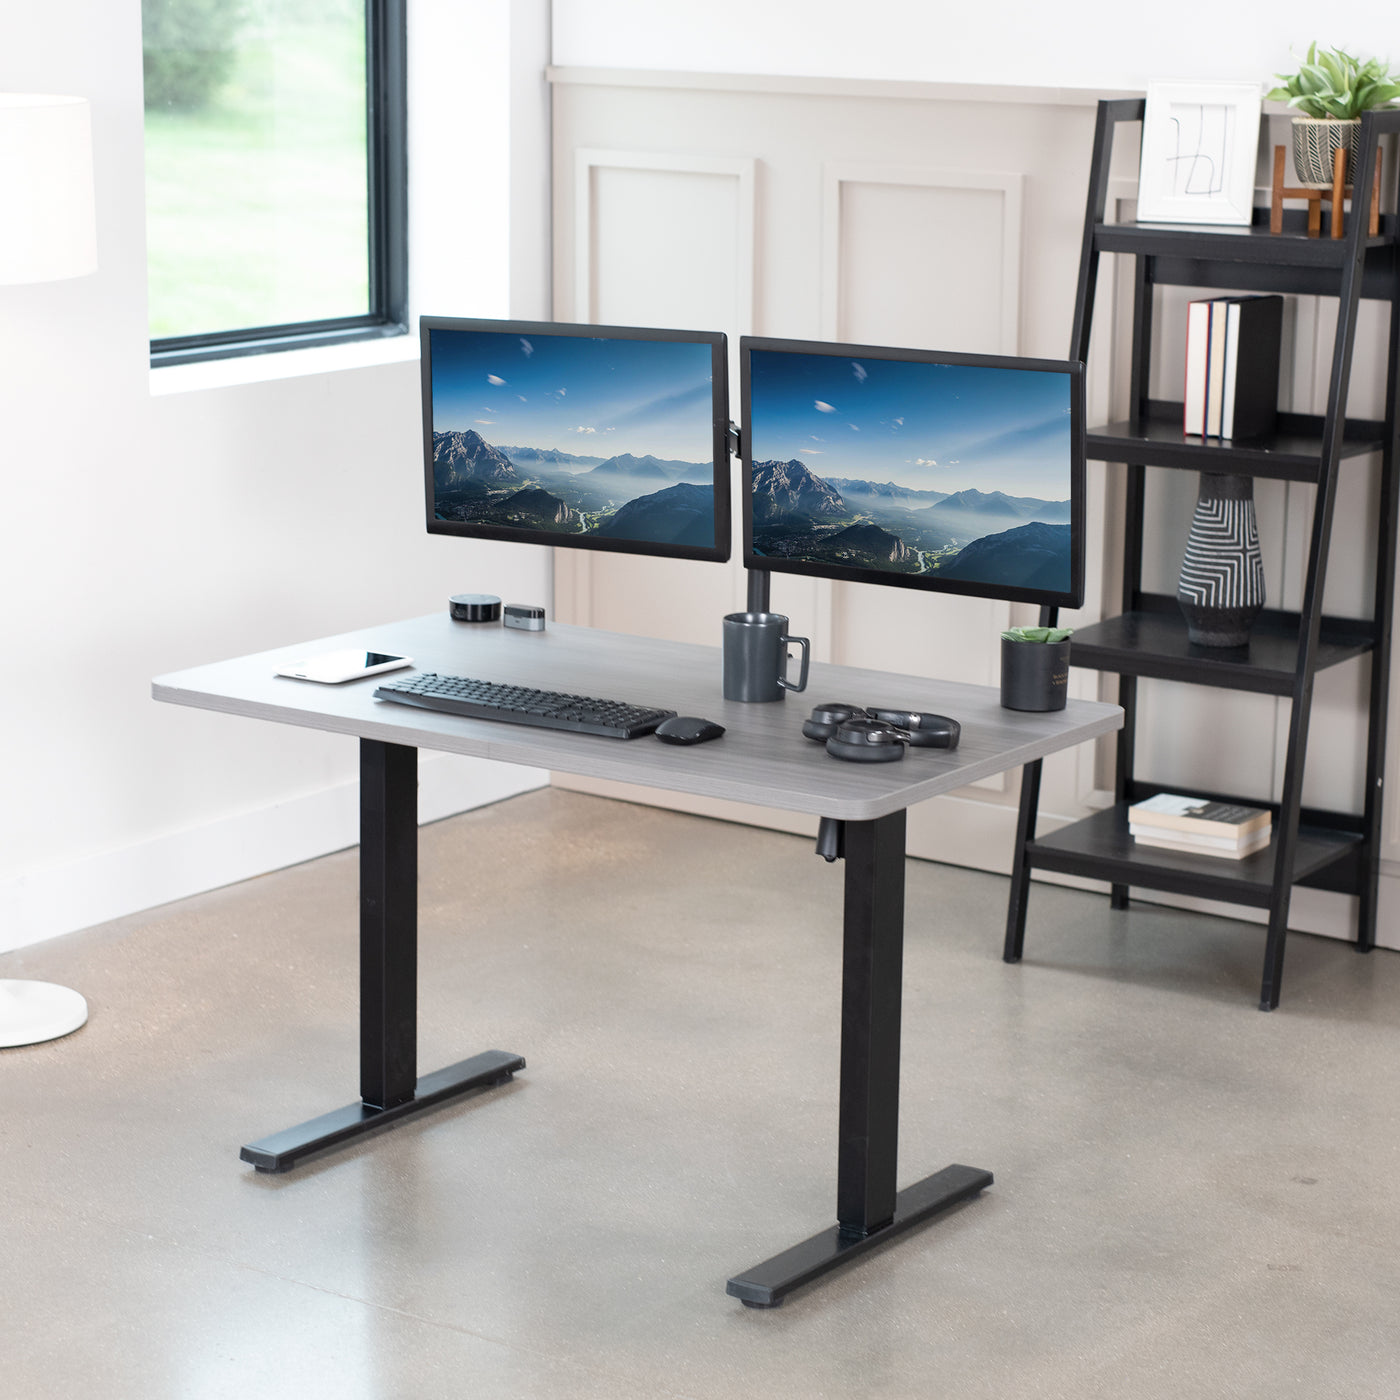 Sturdy desk tabletop for sit or stand electric or manual desk frames.